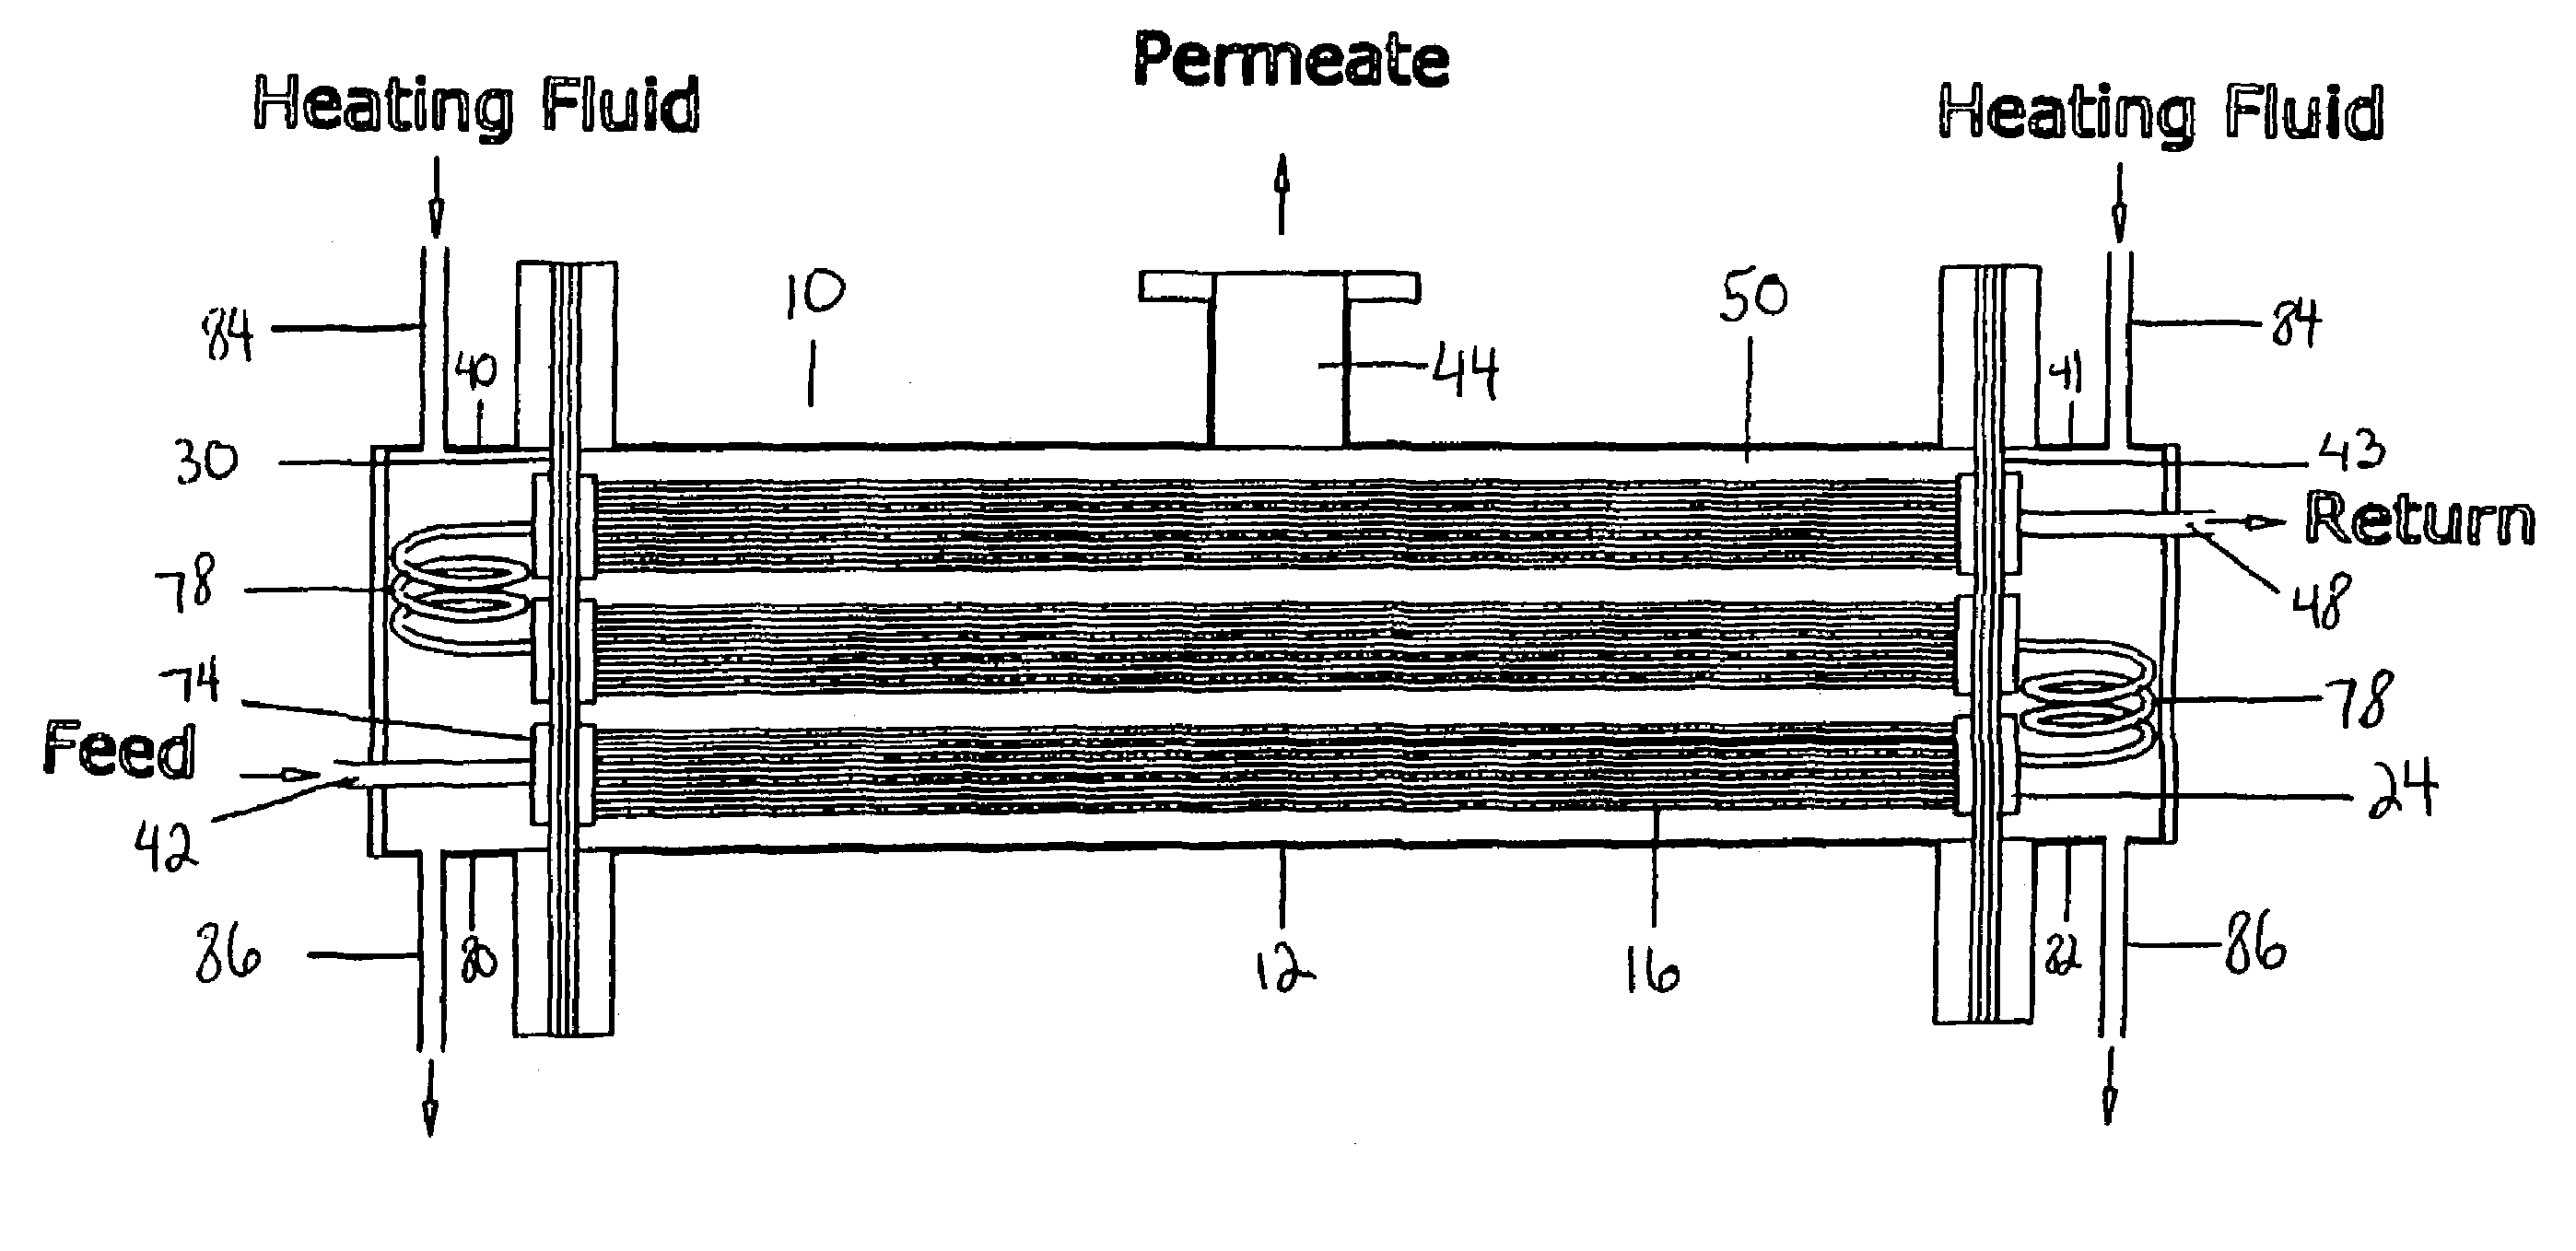 Membrane-assisted fluid separation apparatus and method